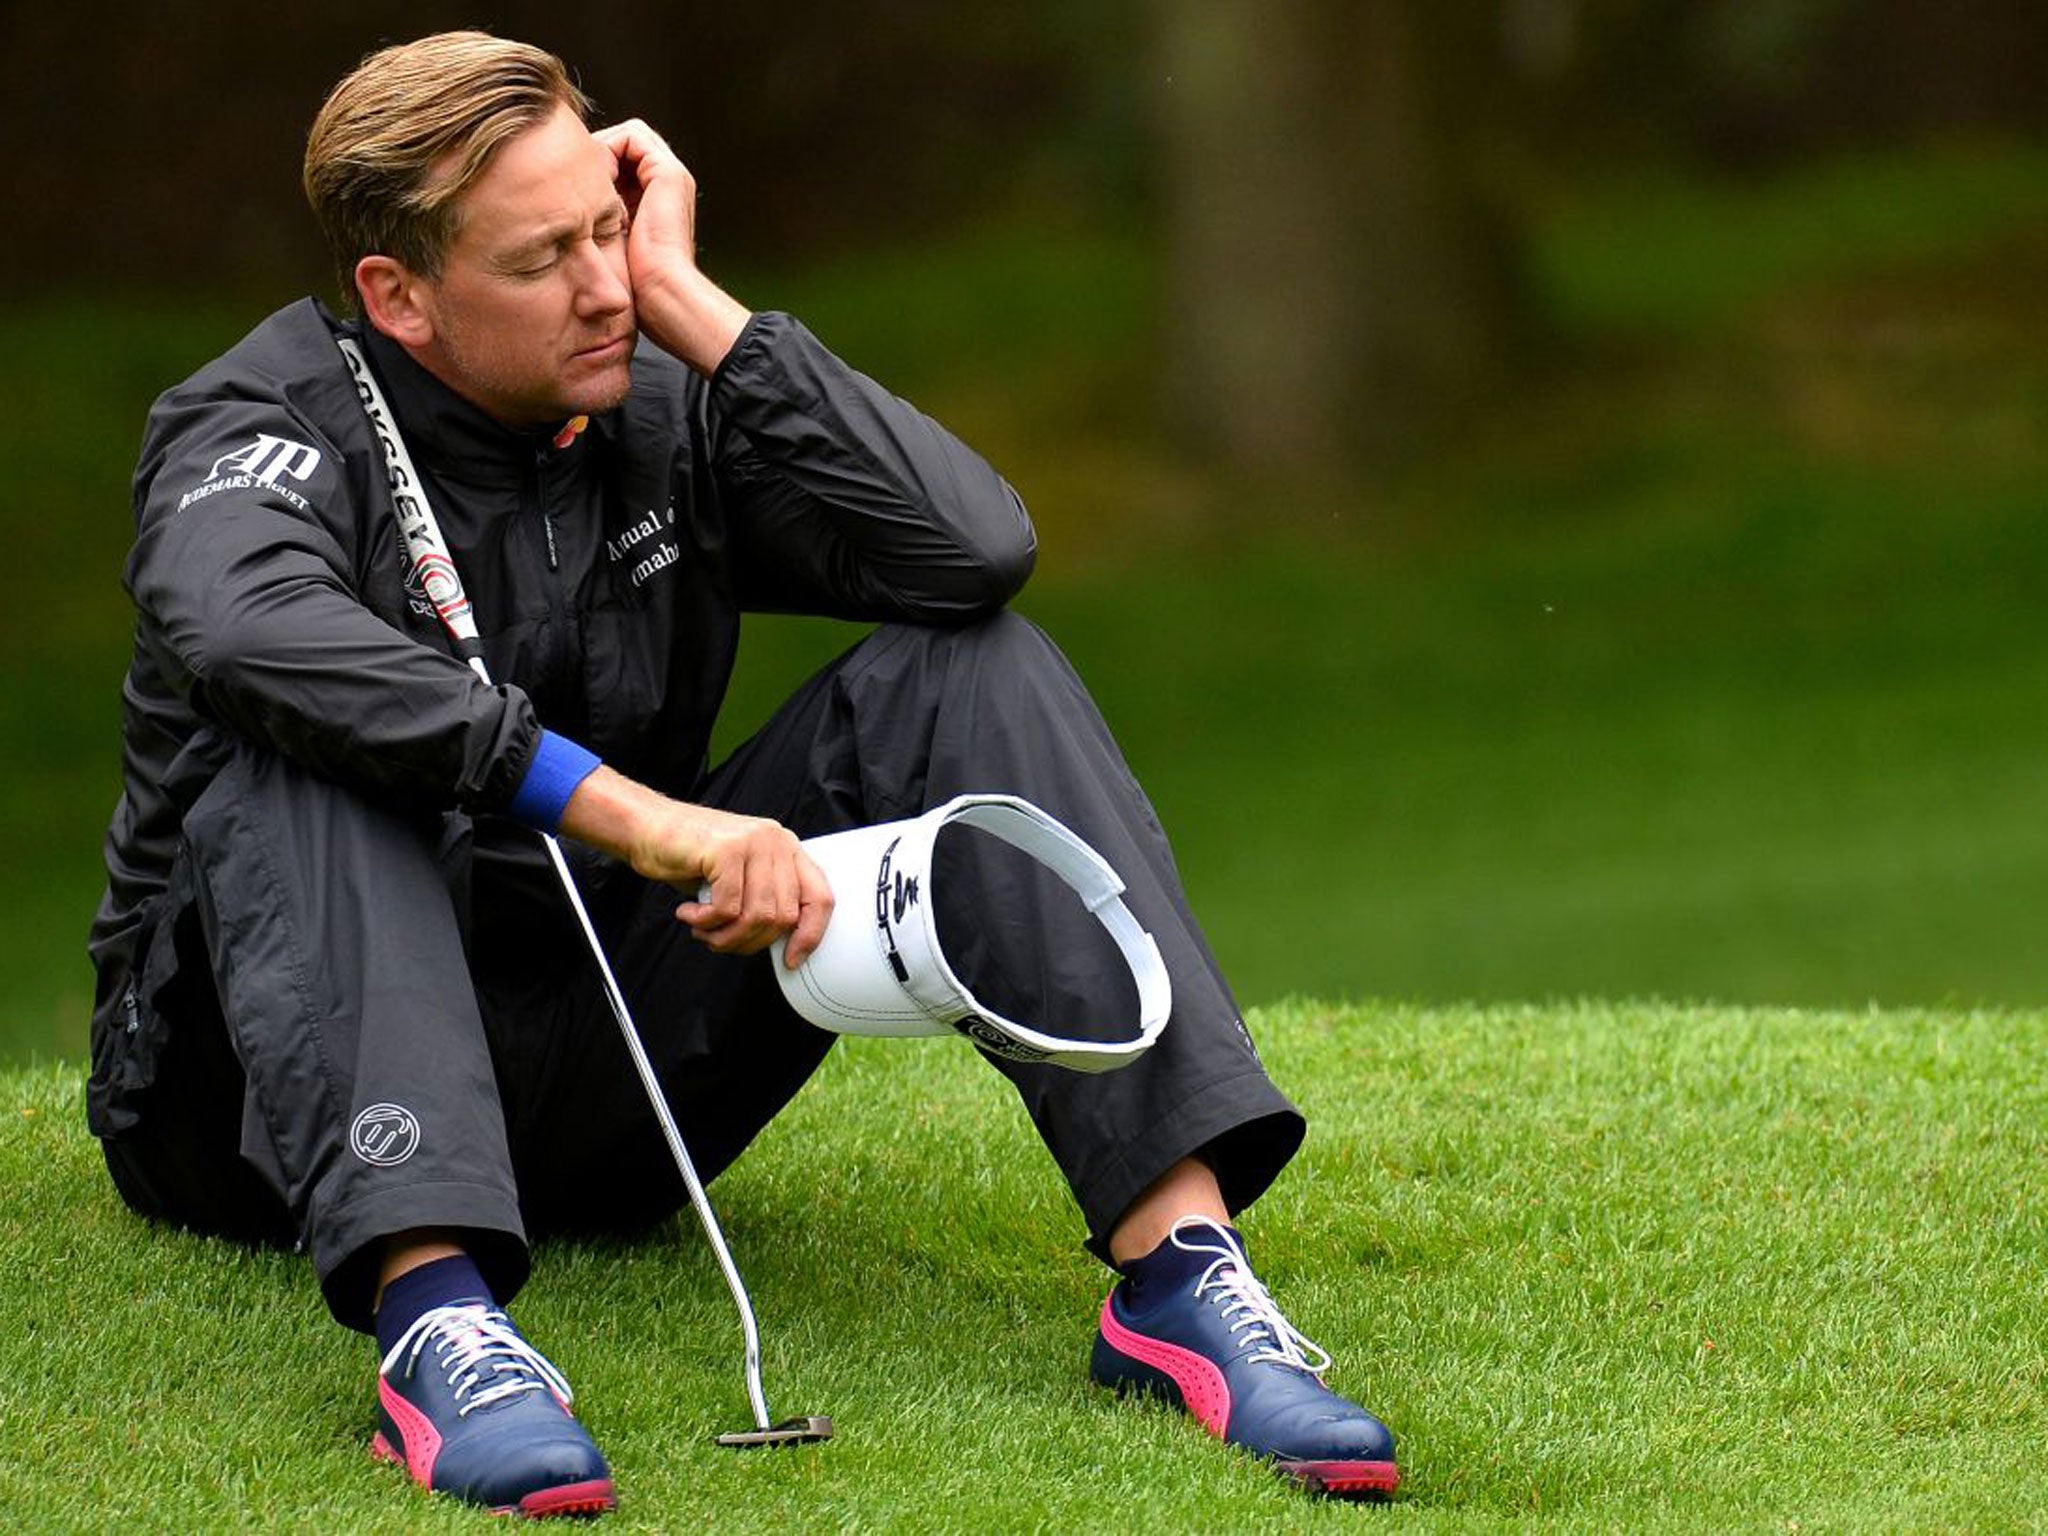 "People just read the stuff on twitter, but you have to have some balance," Ian Poulter